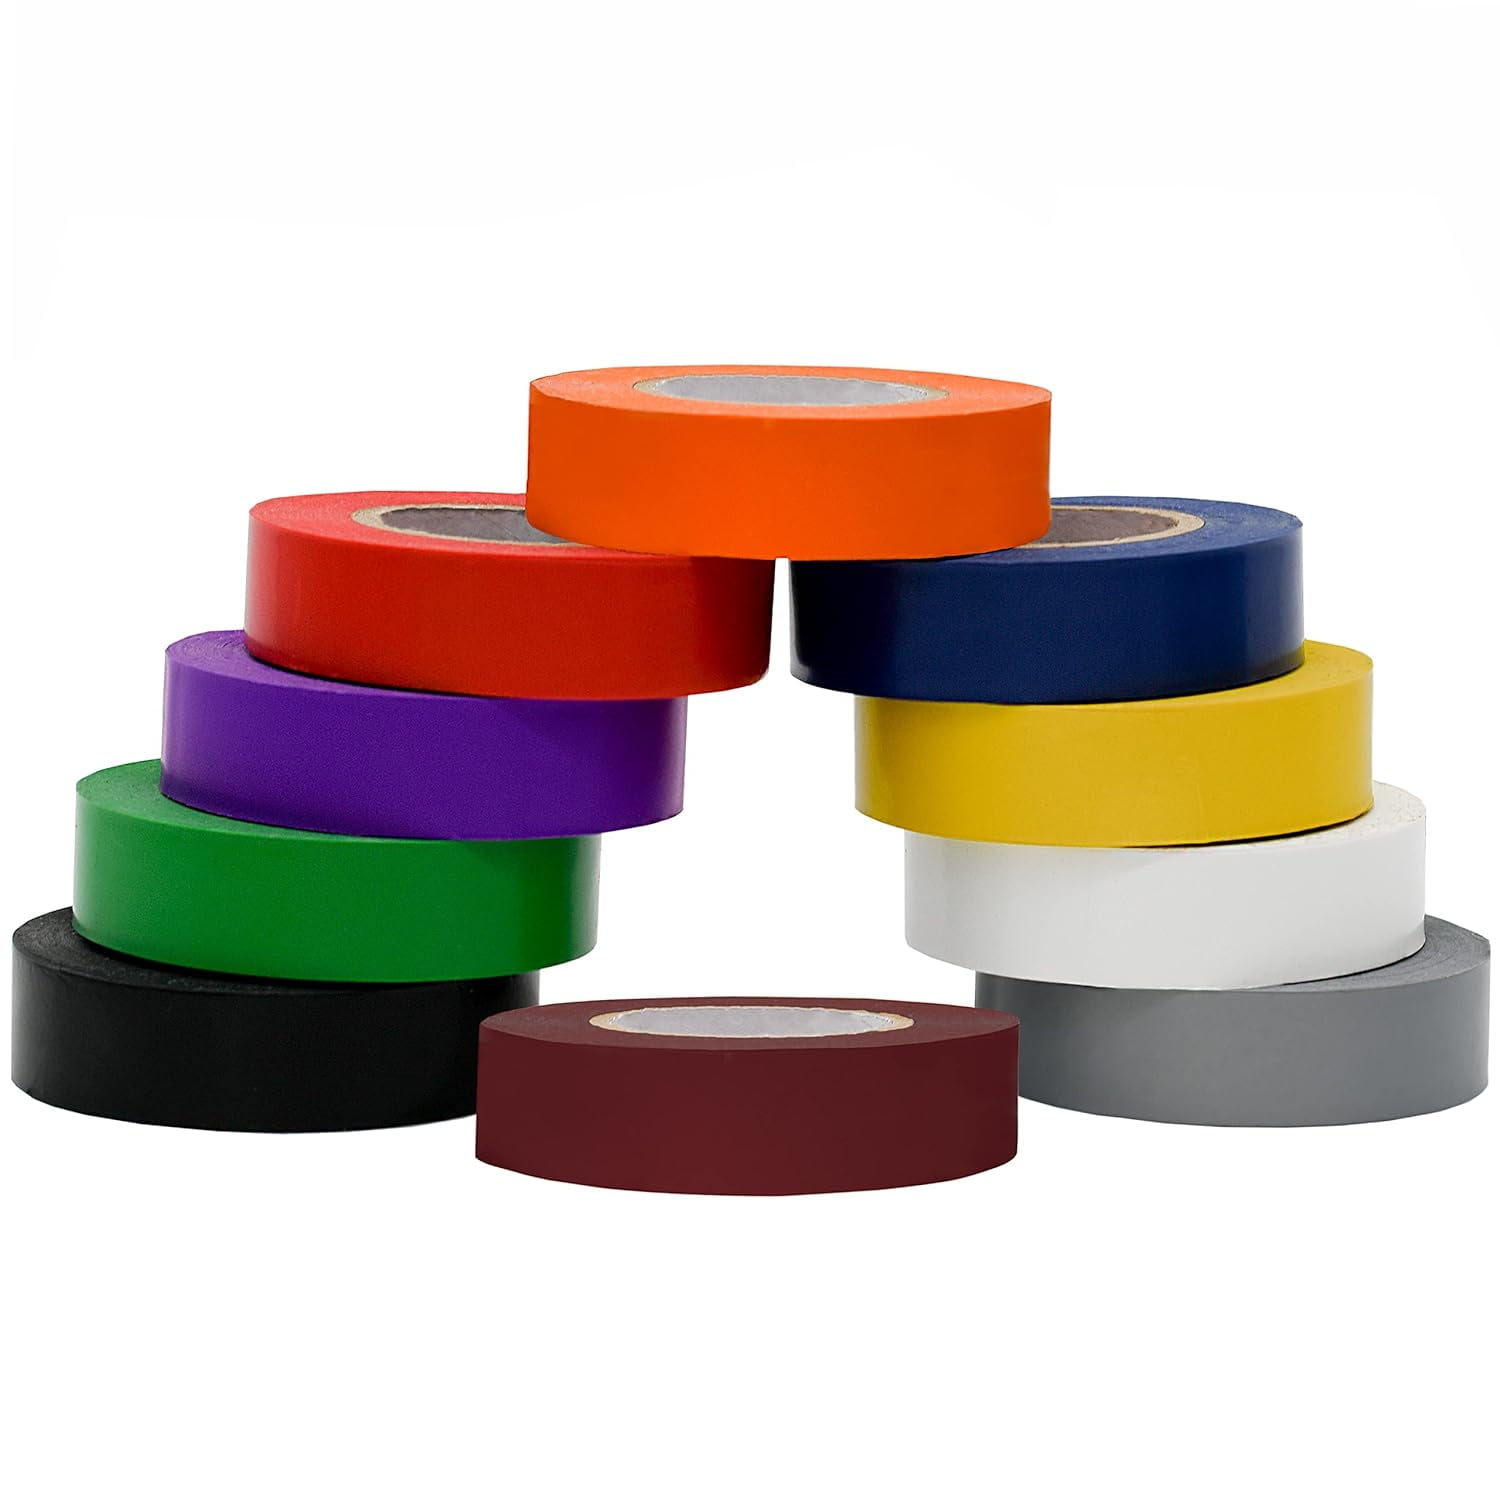 Koltose by Mash - Colored Electrical Tape, 10 Extra Large Rolls, Industrial Grade Waterproof Wire Insulation Tape, .75 Inches by 66 Feet